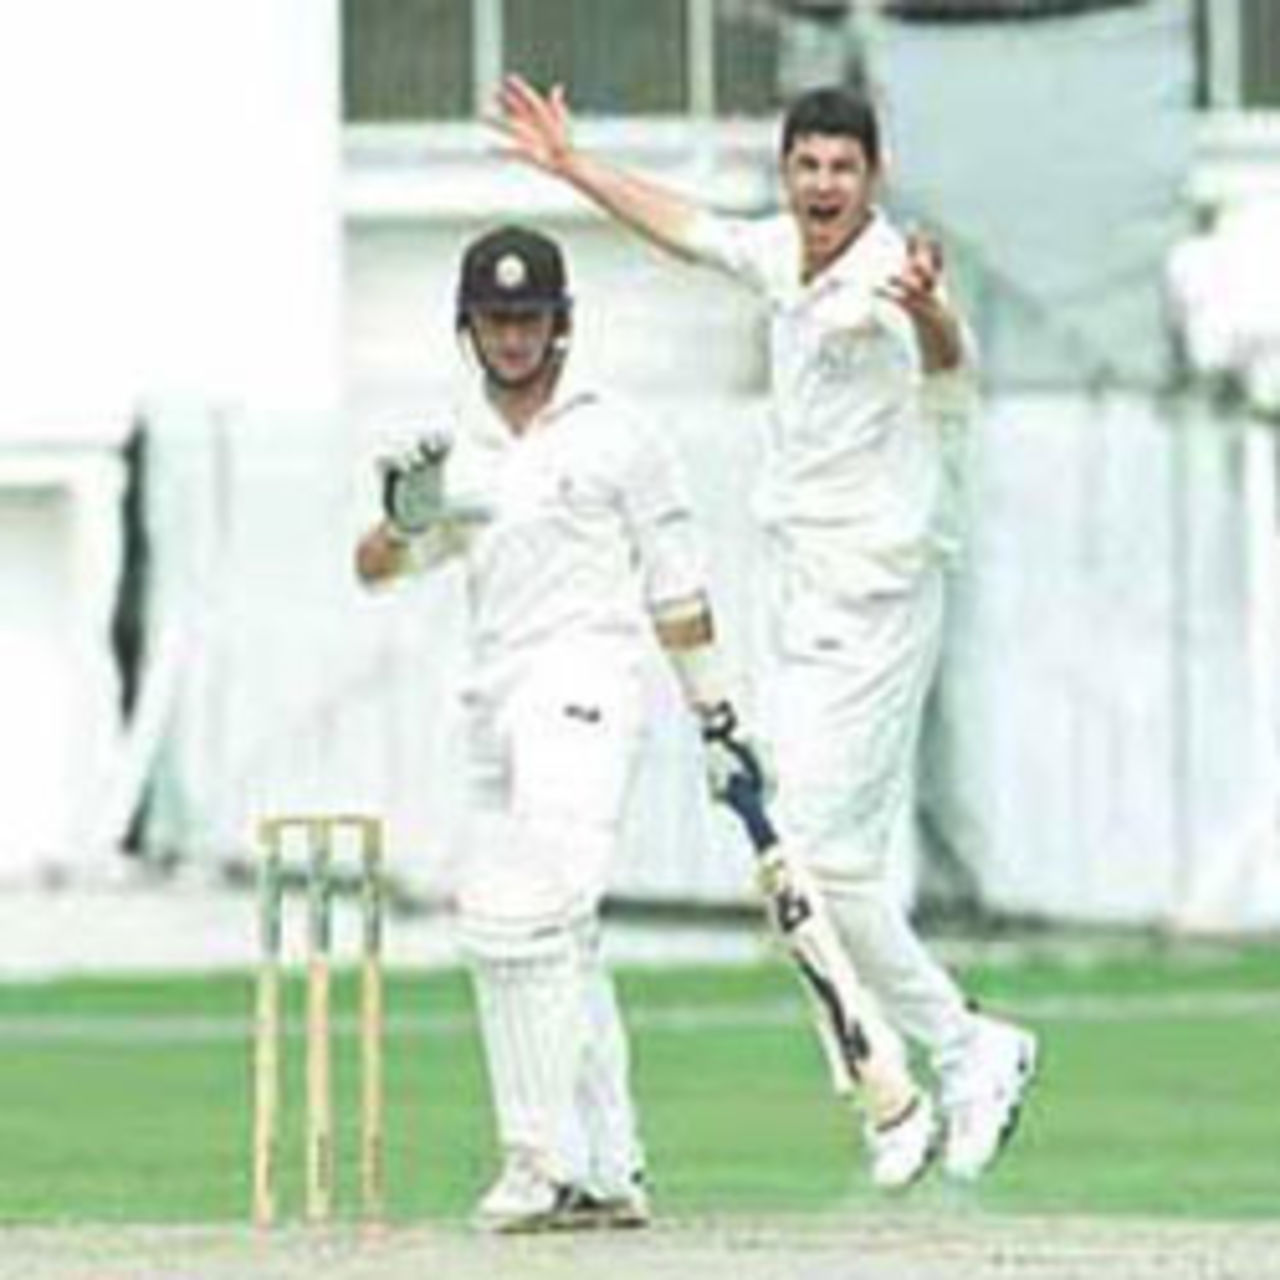 Smethurst overjoyed after trapping Alistair Brown leg before, PPP healthcare County Championship Division One, 2000, Surrey v Lancashire, Kennington Oval, London, 02-05 August 2000(Day 1).